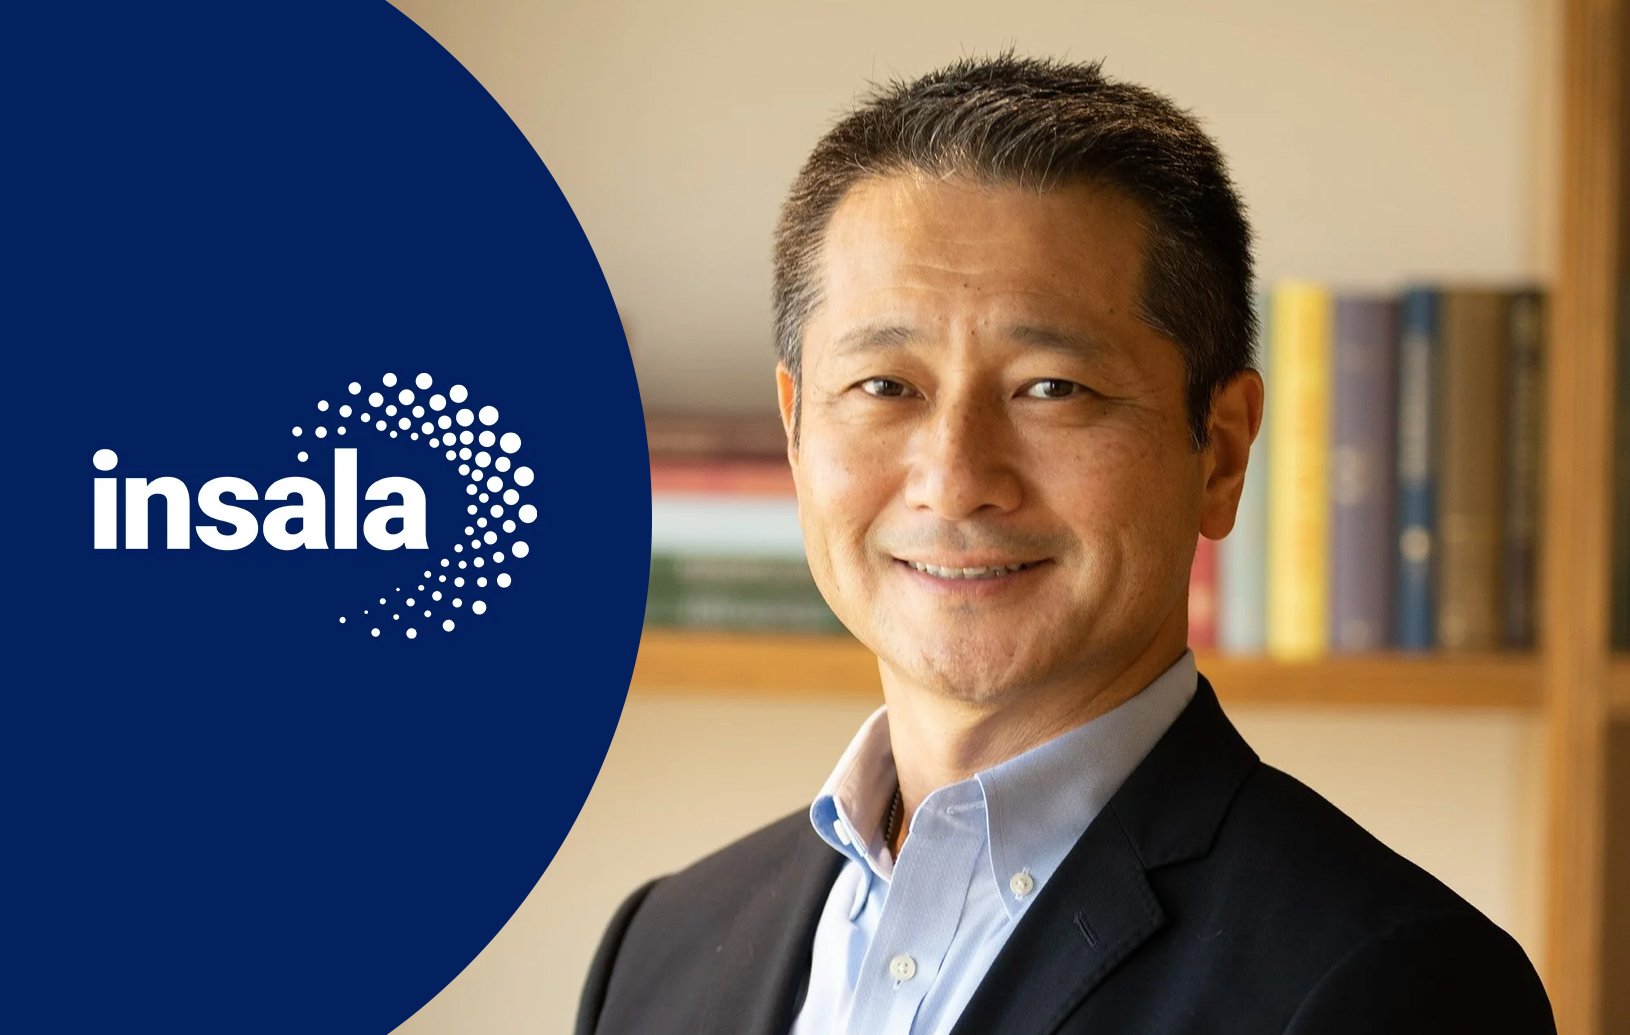 insala_appoints_taito_nakagawa_as_ceo_to_lead_the_innovation_in_forging_the_future_of_workplaces